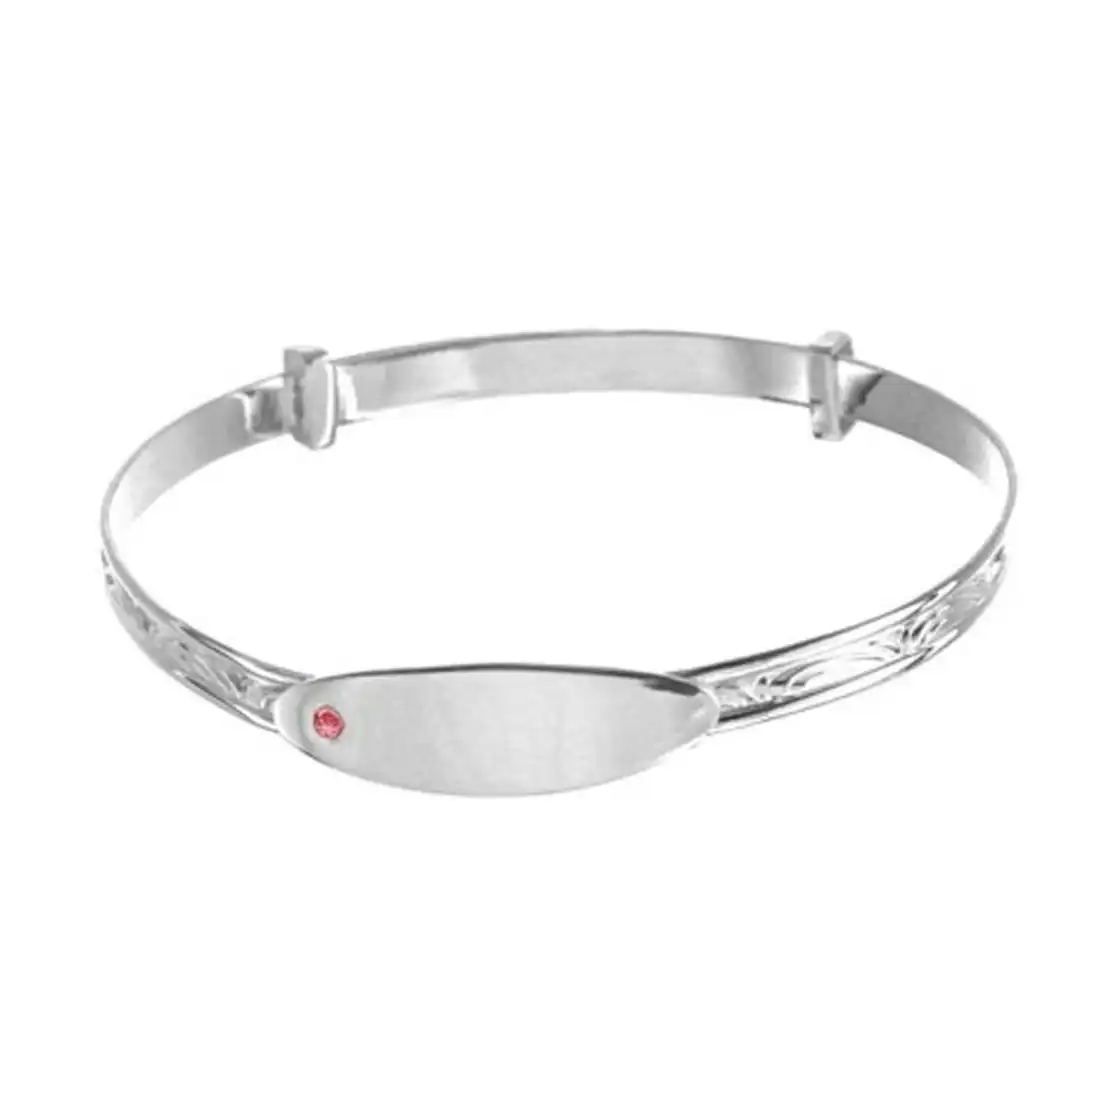 Children's Sterling Silver and Pink Zirconia ID Bangle